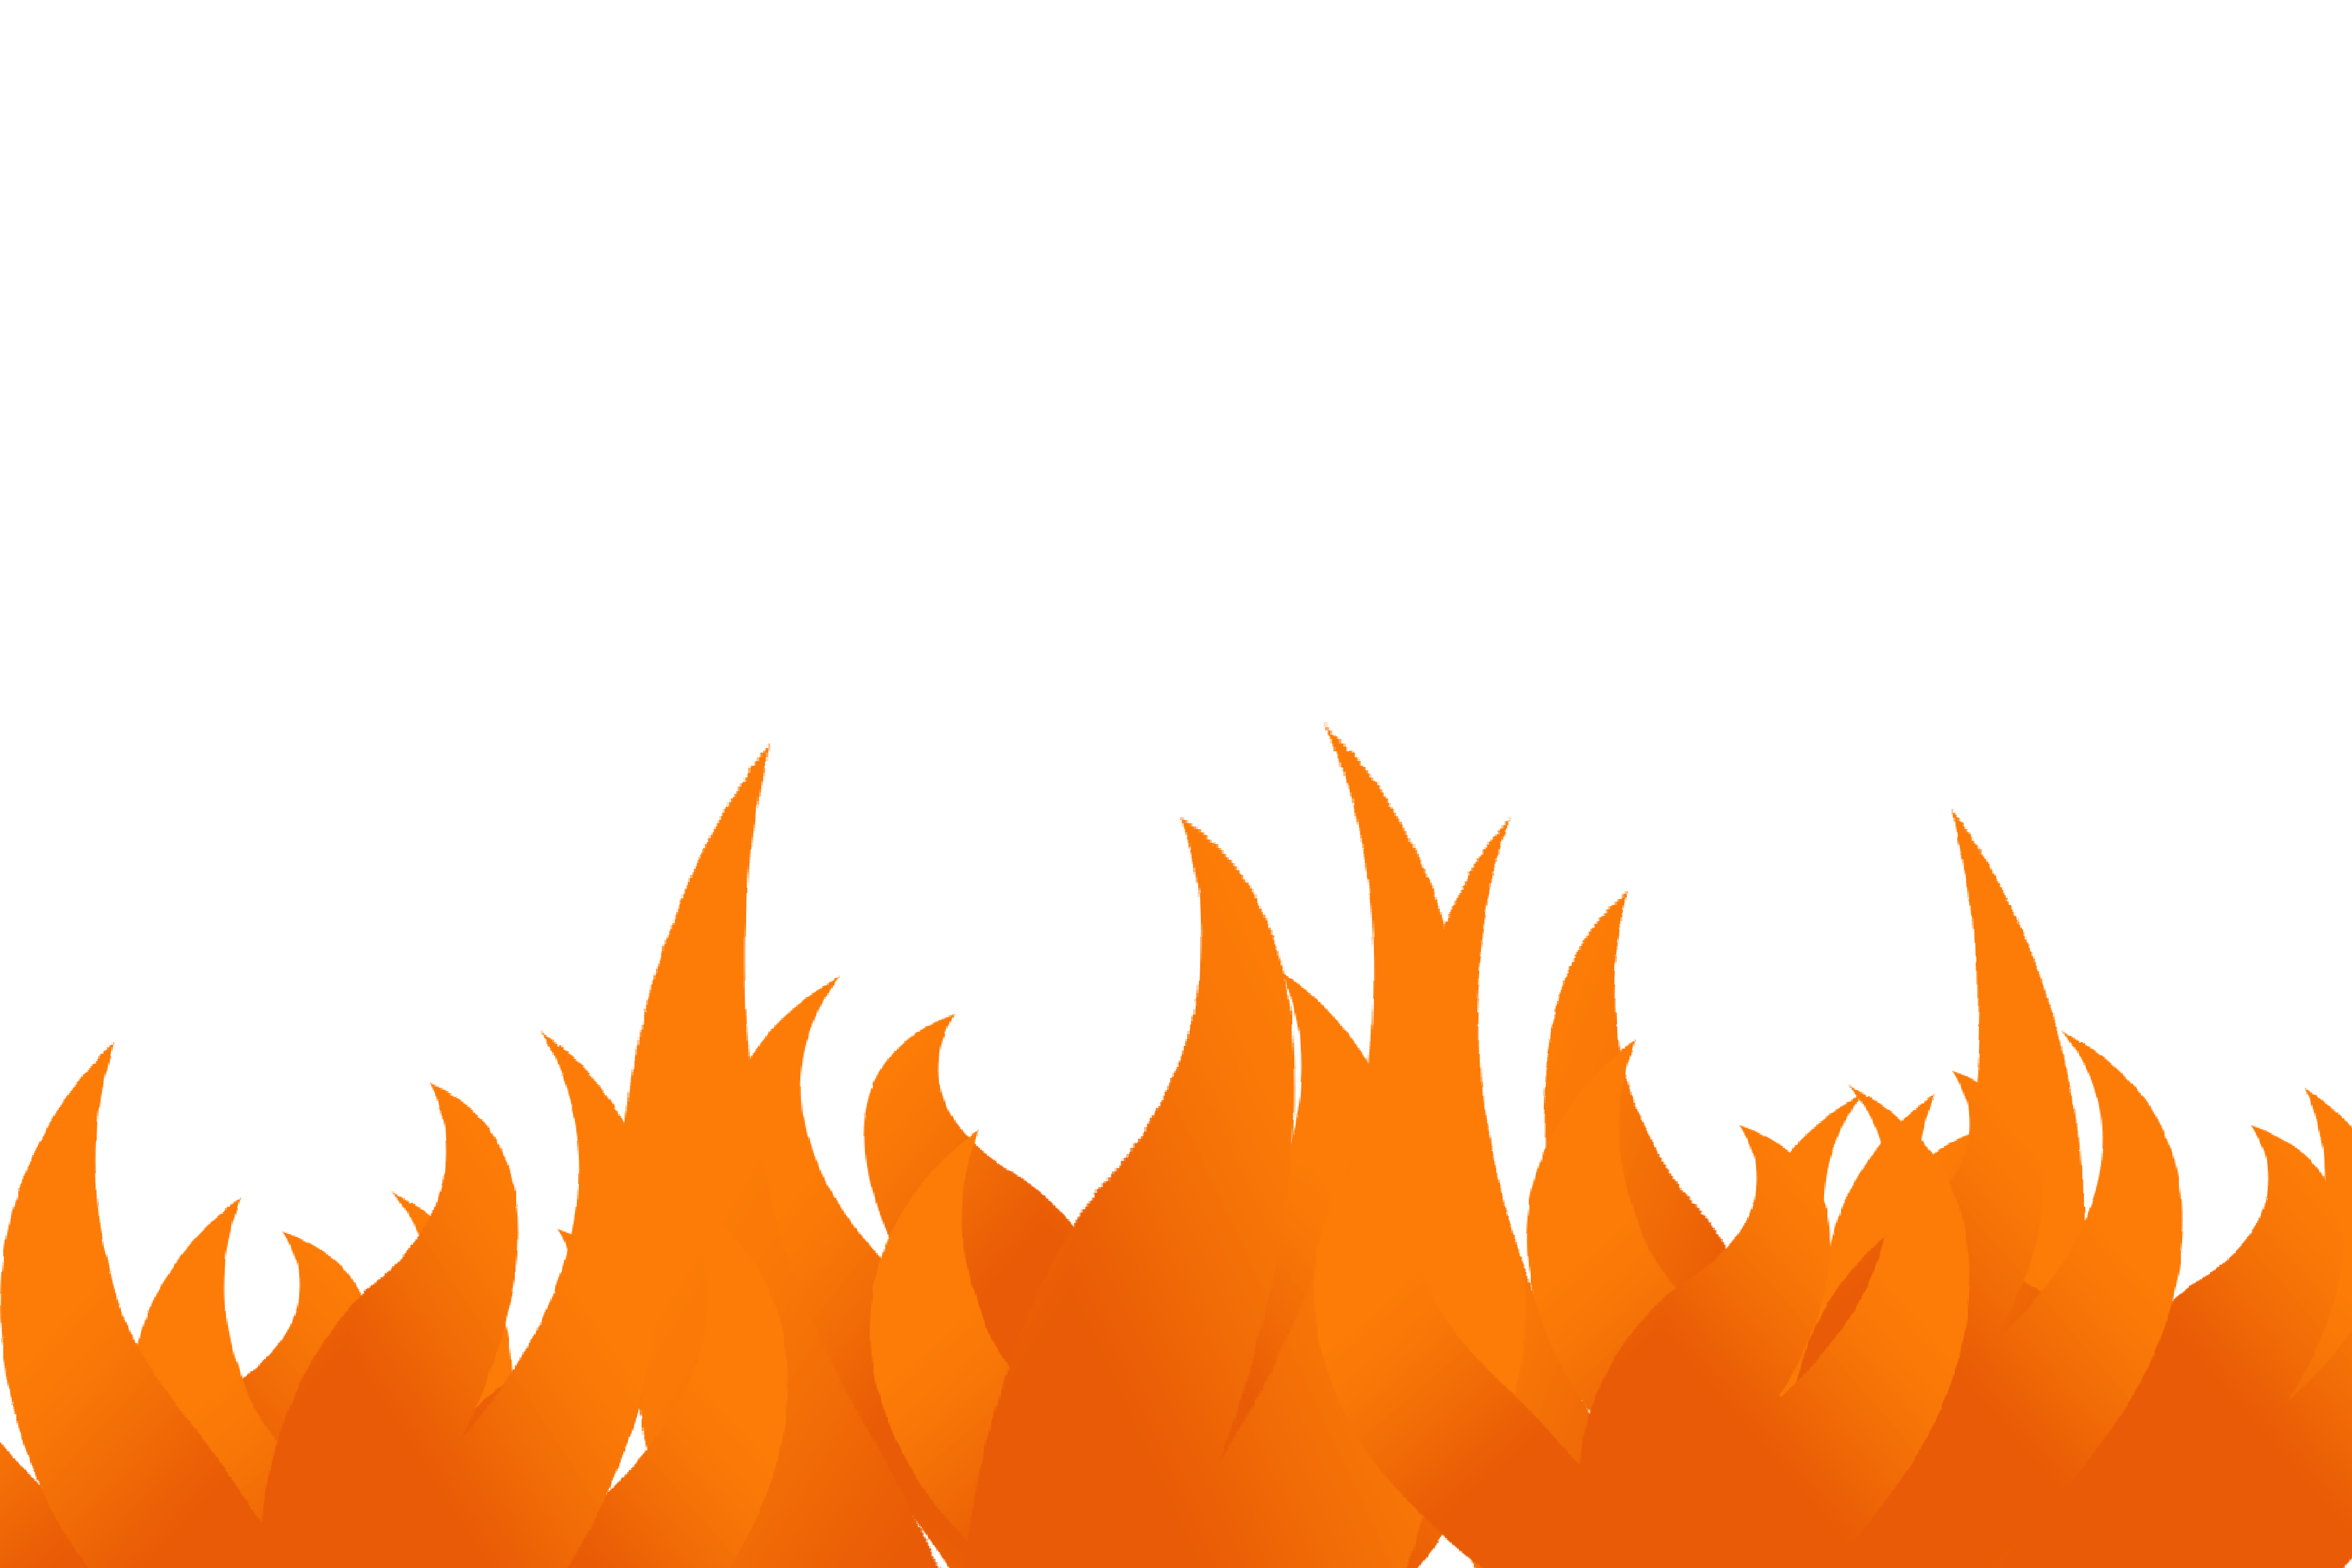 Fire Flame border PNG